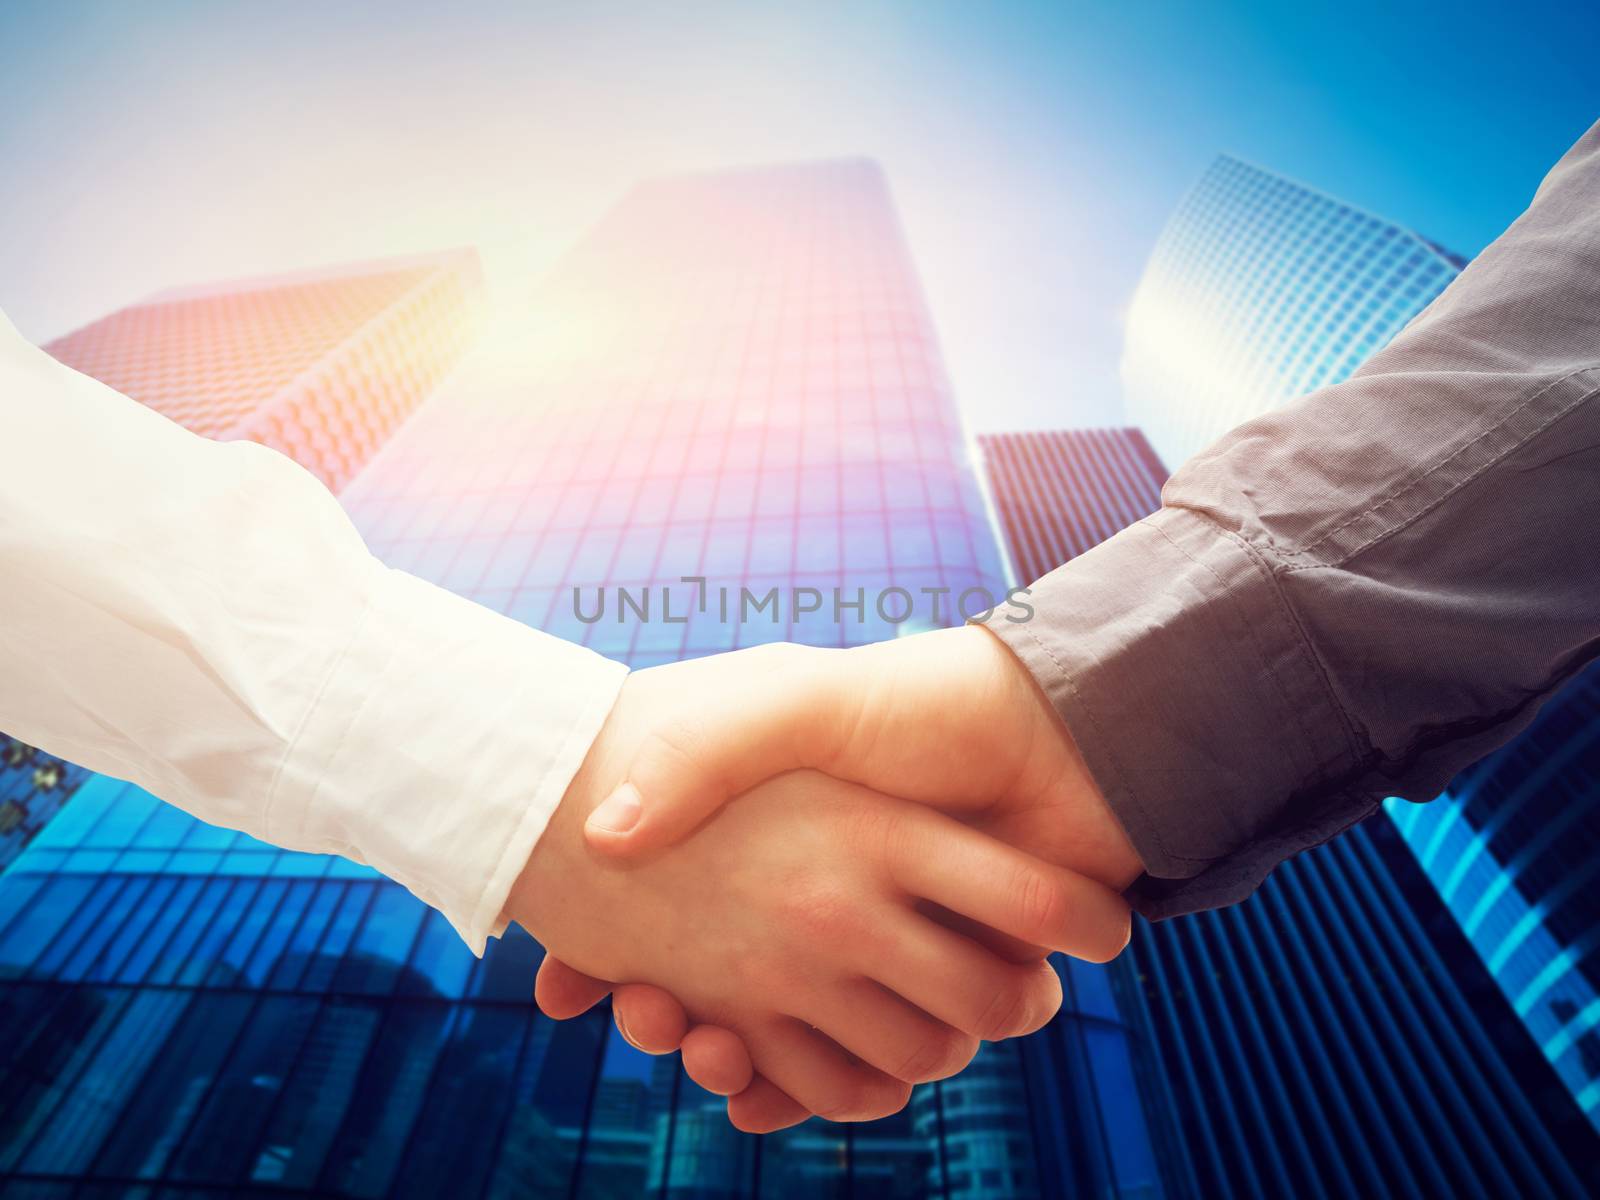 Business handshake on modern skyscrapers background. Deal, success, contract, cooperation concepts 